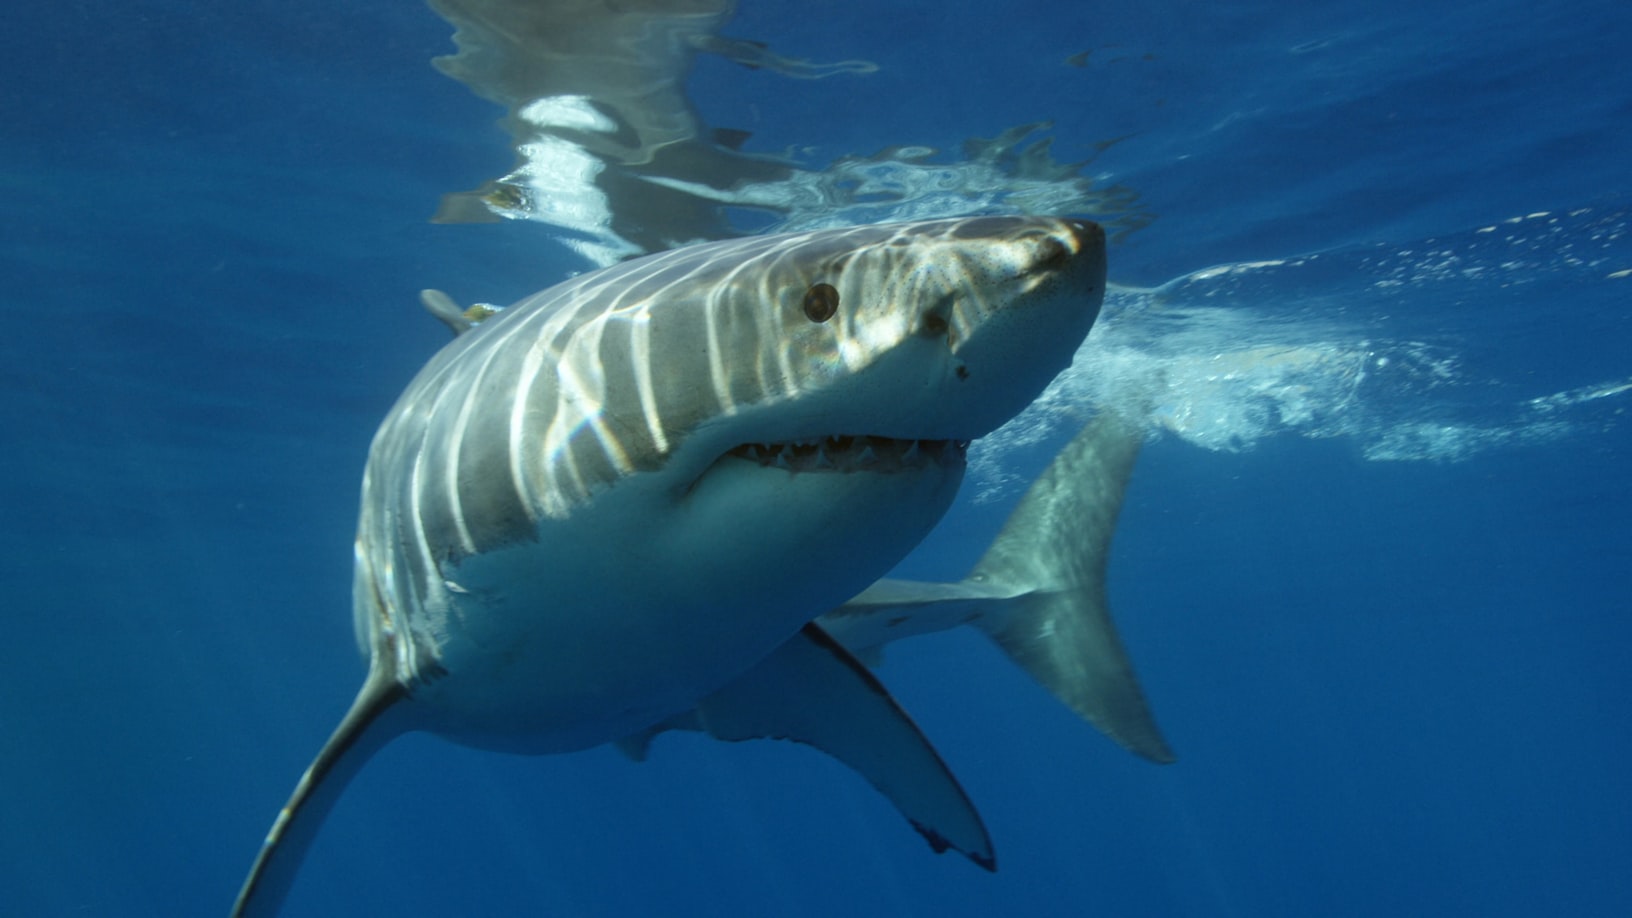 The Great White Shark: The animal with the highest bite force